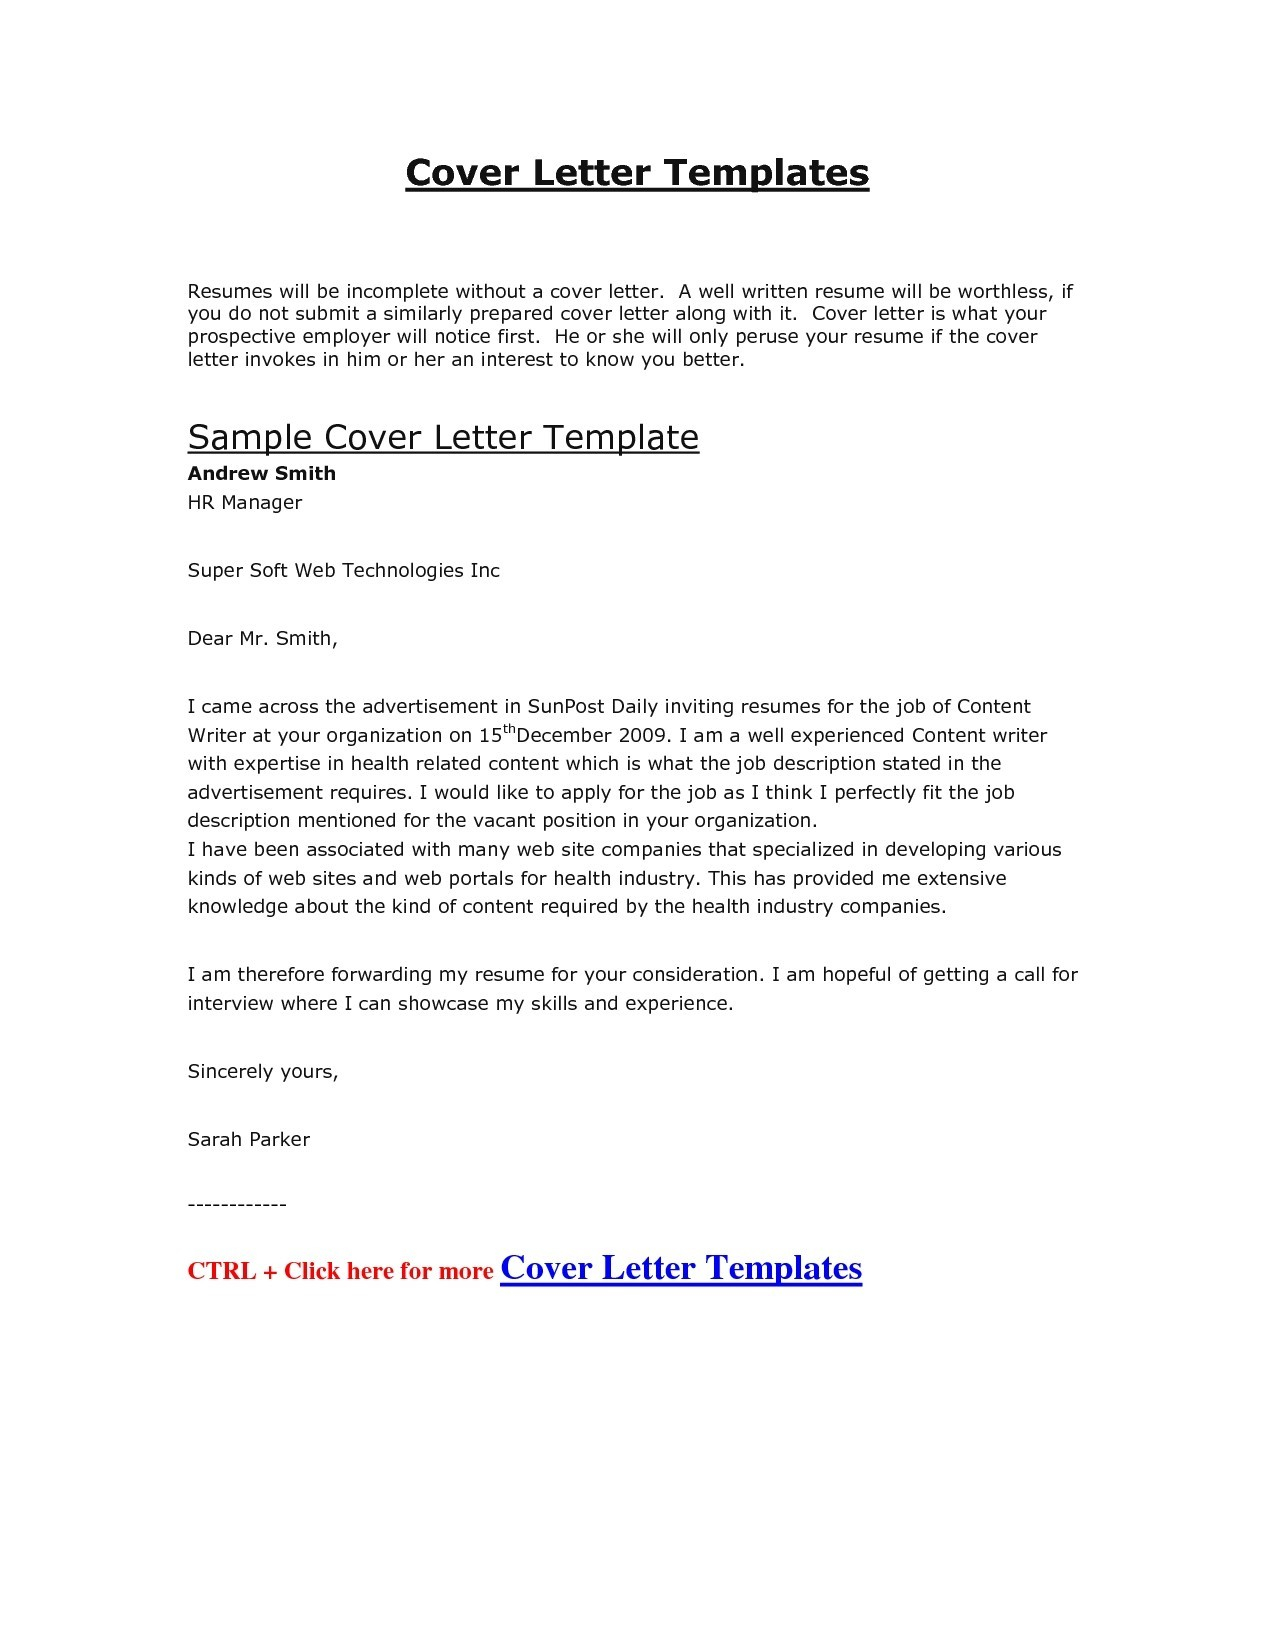 Cover Letter Template for It Job - Job Application Letter format Template Copy Cover Letter Template Hr